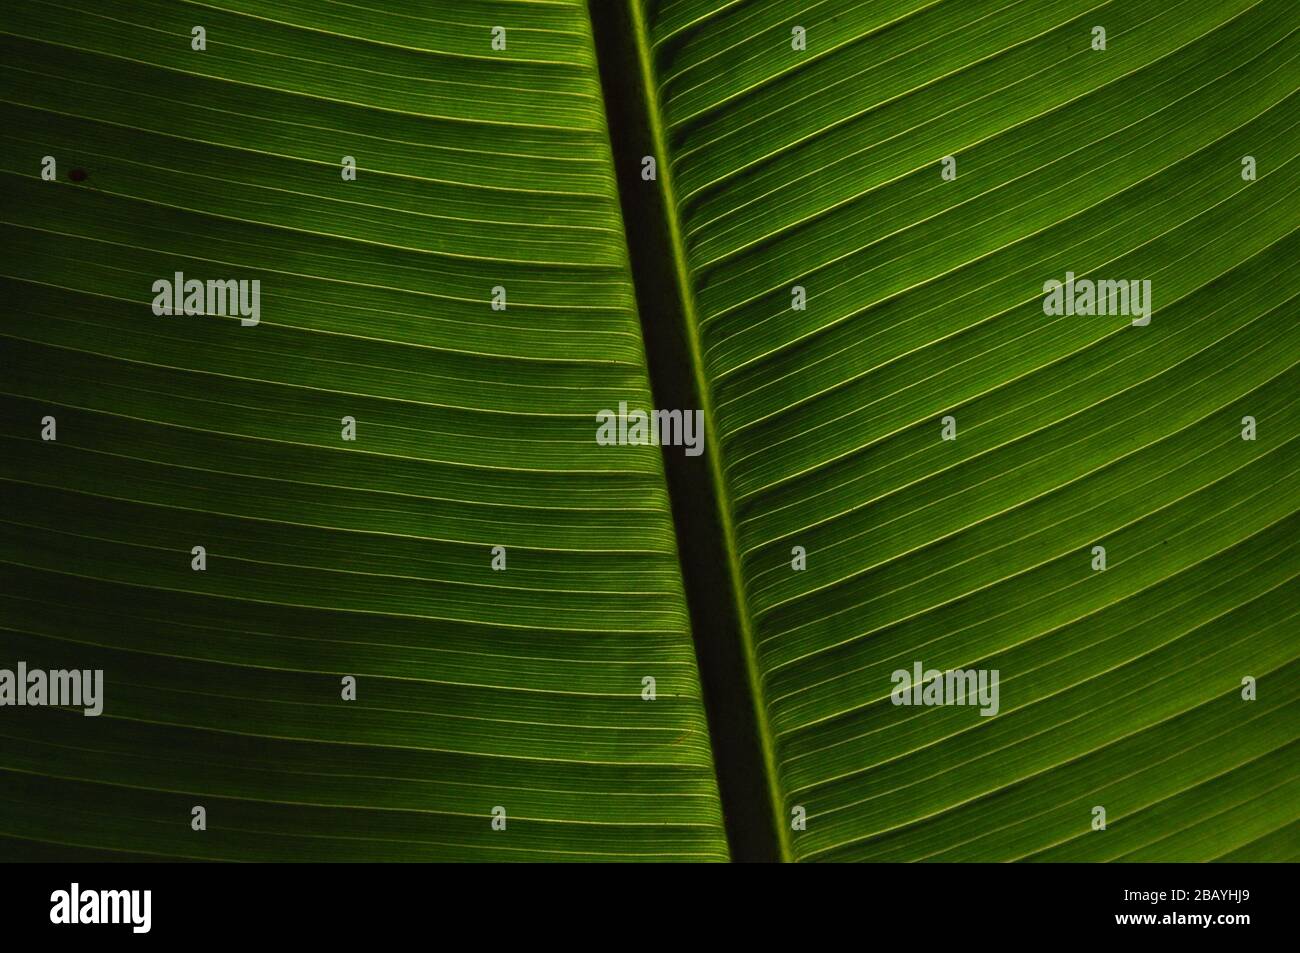 Leaves of tropical plants growing in the jungle. Details of the innervation of the leaf blade. Nerves and connections of green elements. Carbon absorp Stock Photo